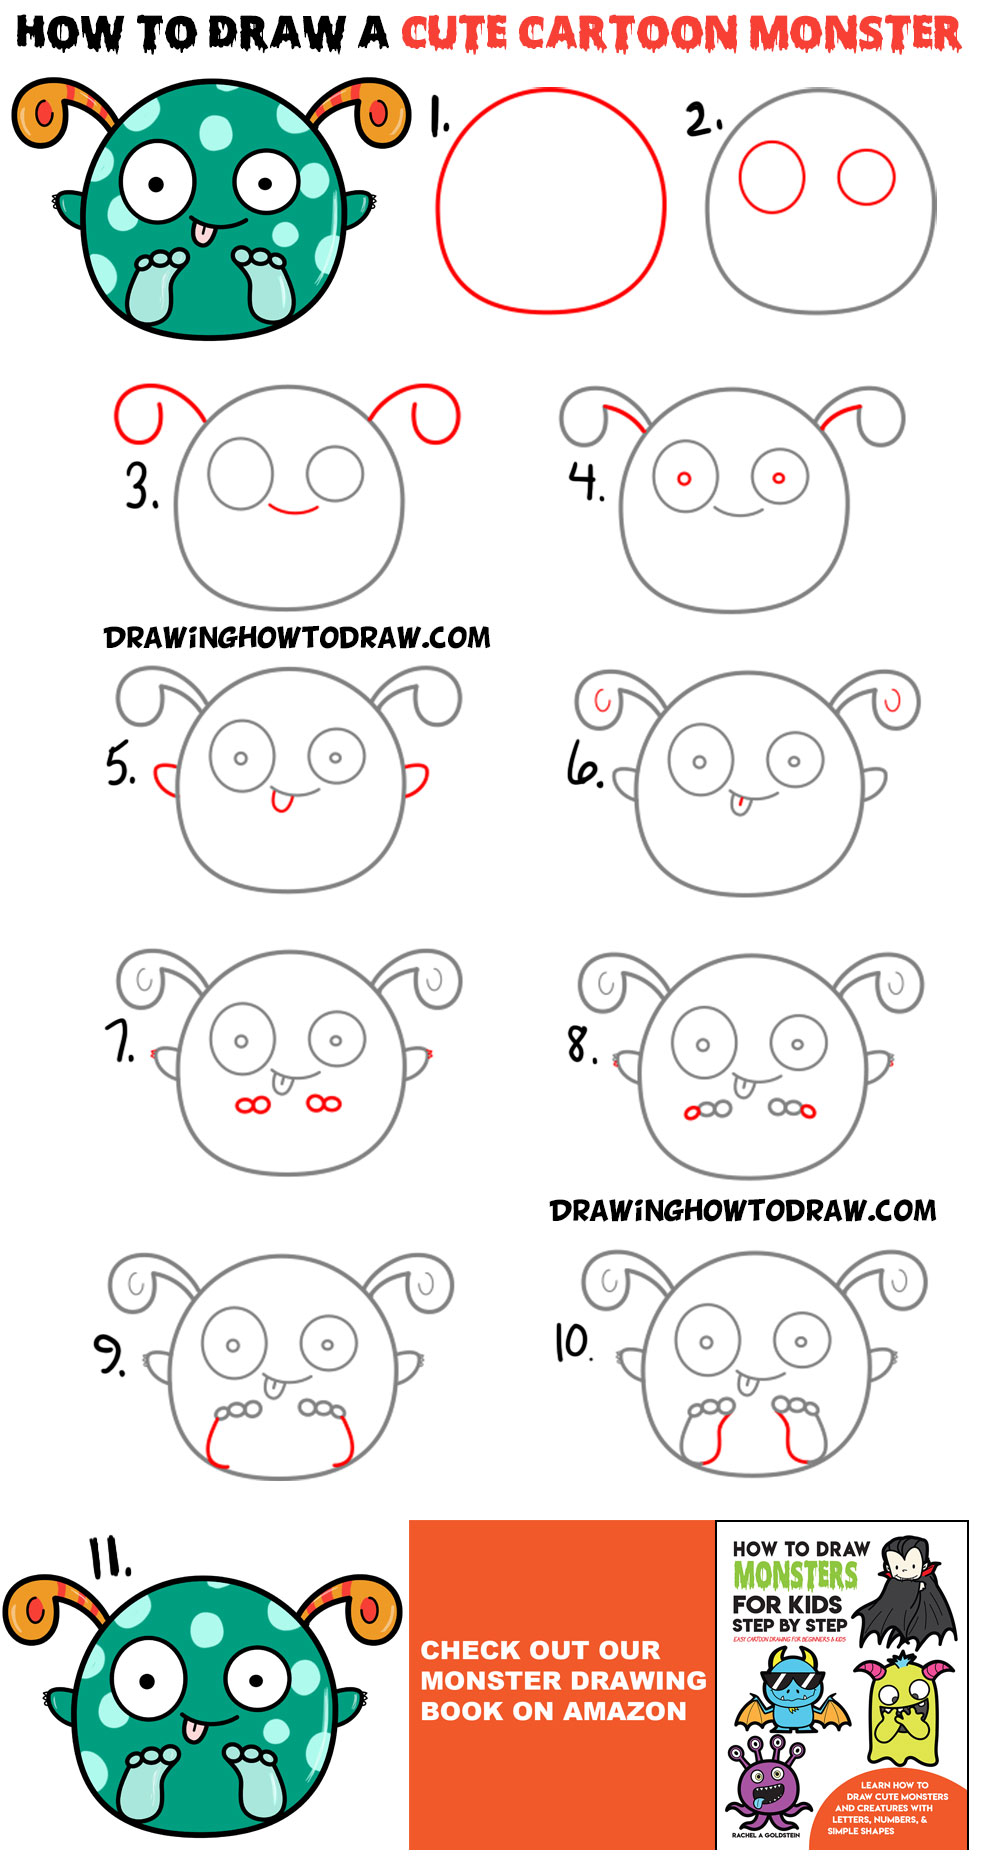 Learn How to Draw a Cute Cartoon Monster - Super Easy Step by Step Drawing Tutorial for Kids and Beginners